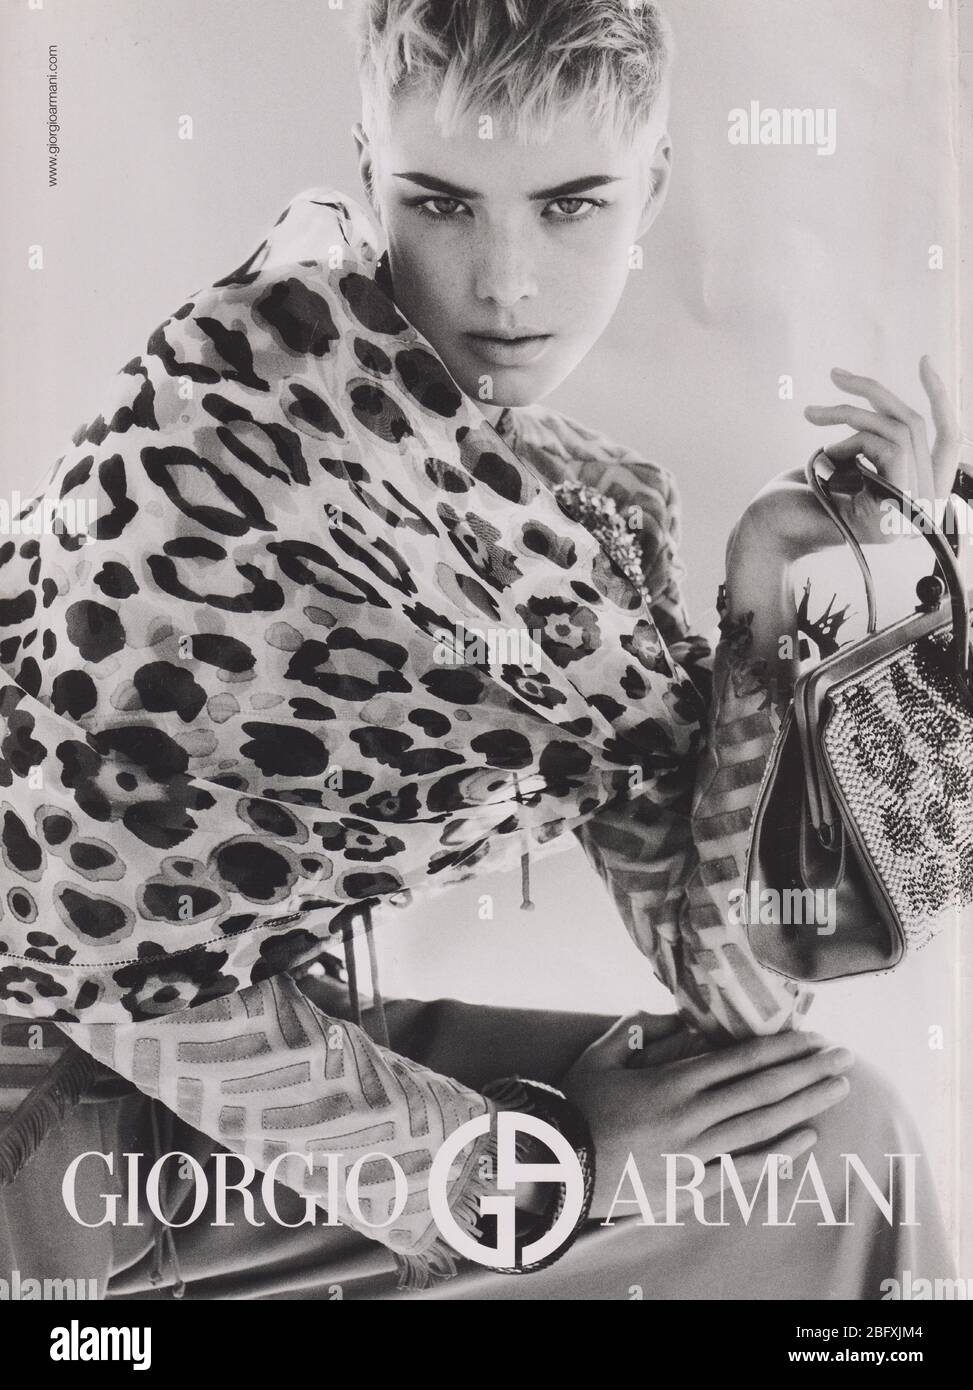 poster advertising Giorgio Armani with Agyness Deyn in paper magazine from 2007 year, advertisement, creative Giorgio Armani advert from 2000s Stock Photo